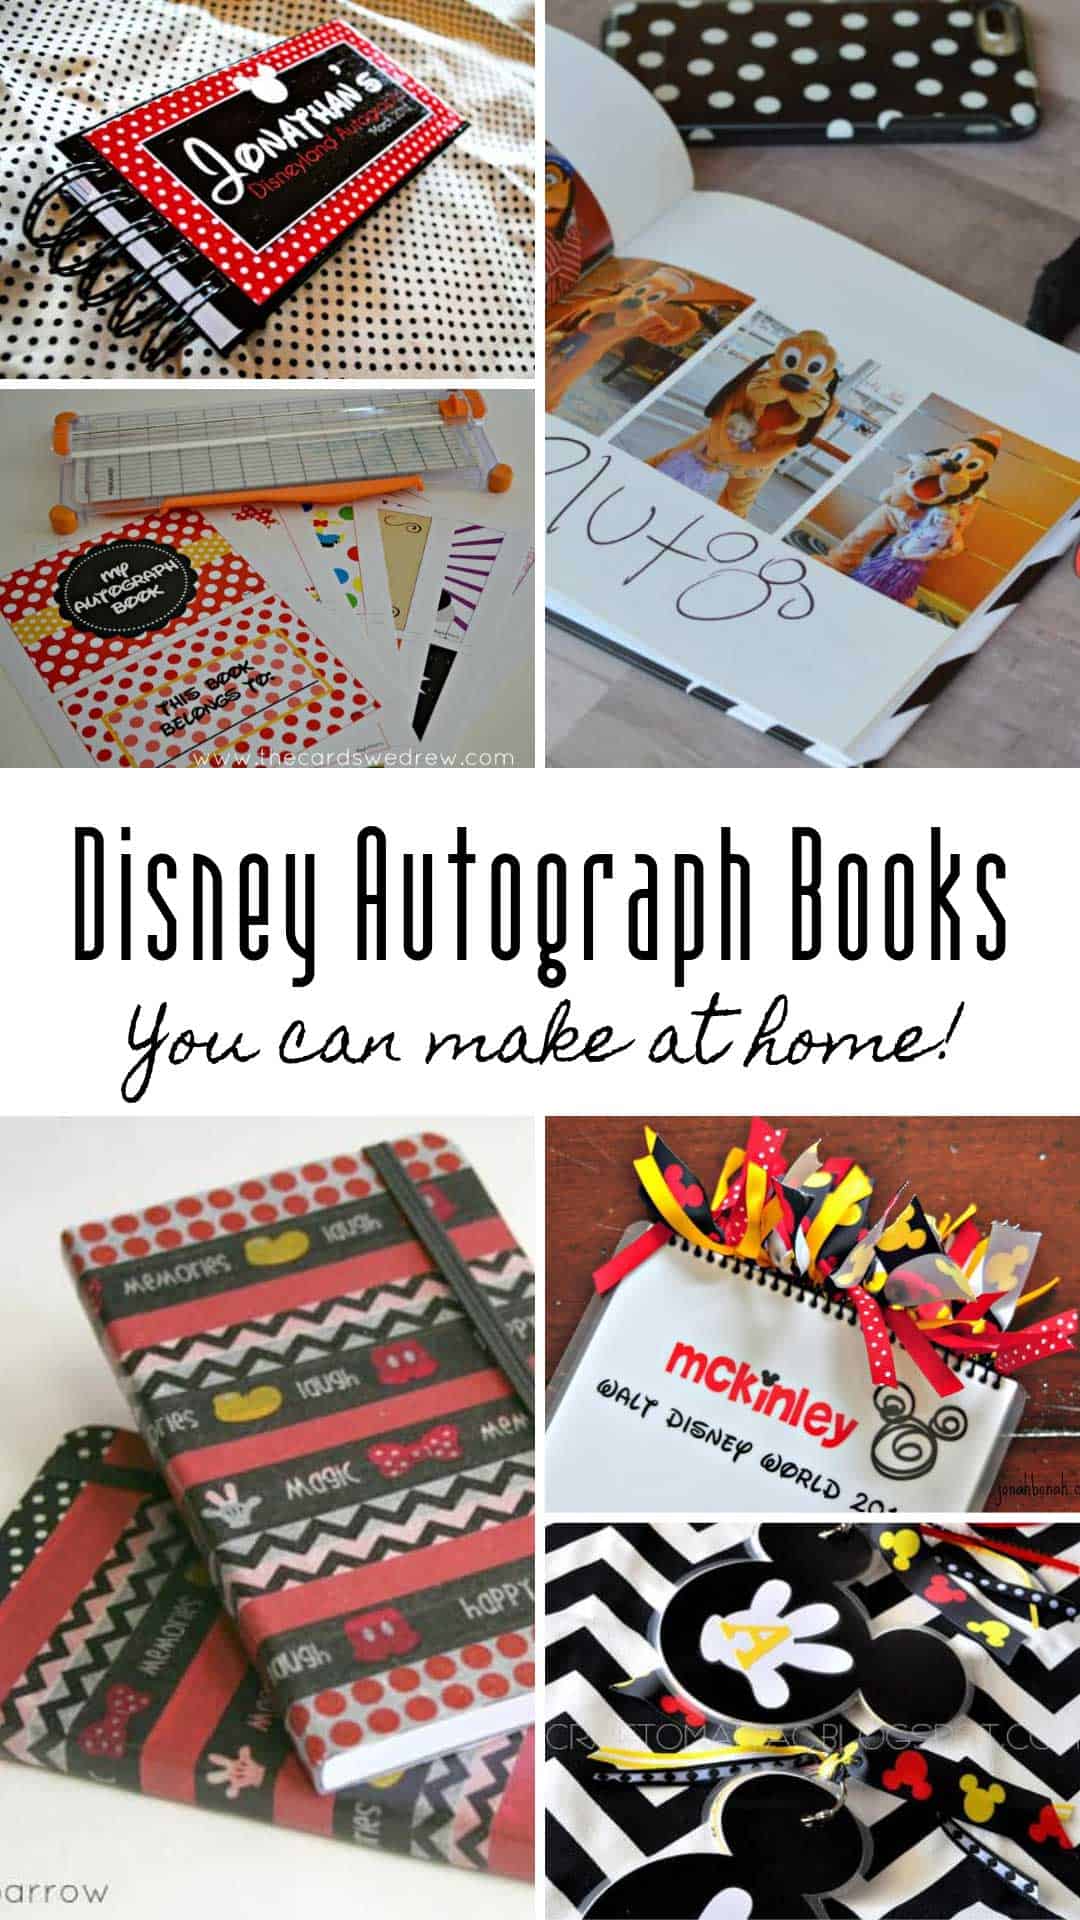 So many great ways to make your own Disney autograph books for your Disney World vacation!